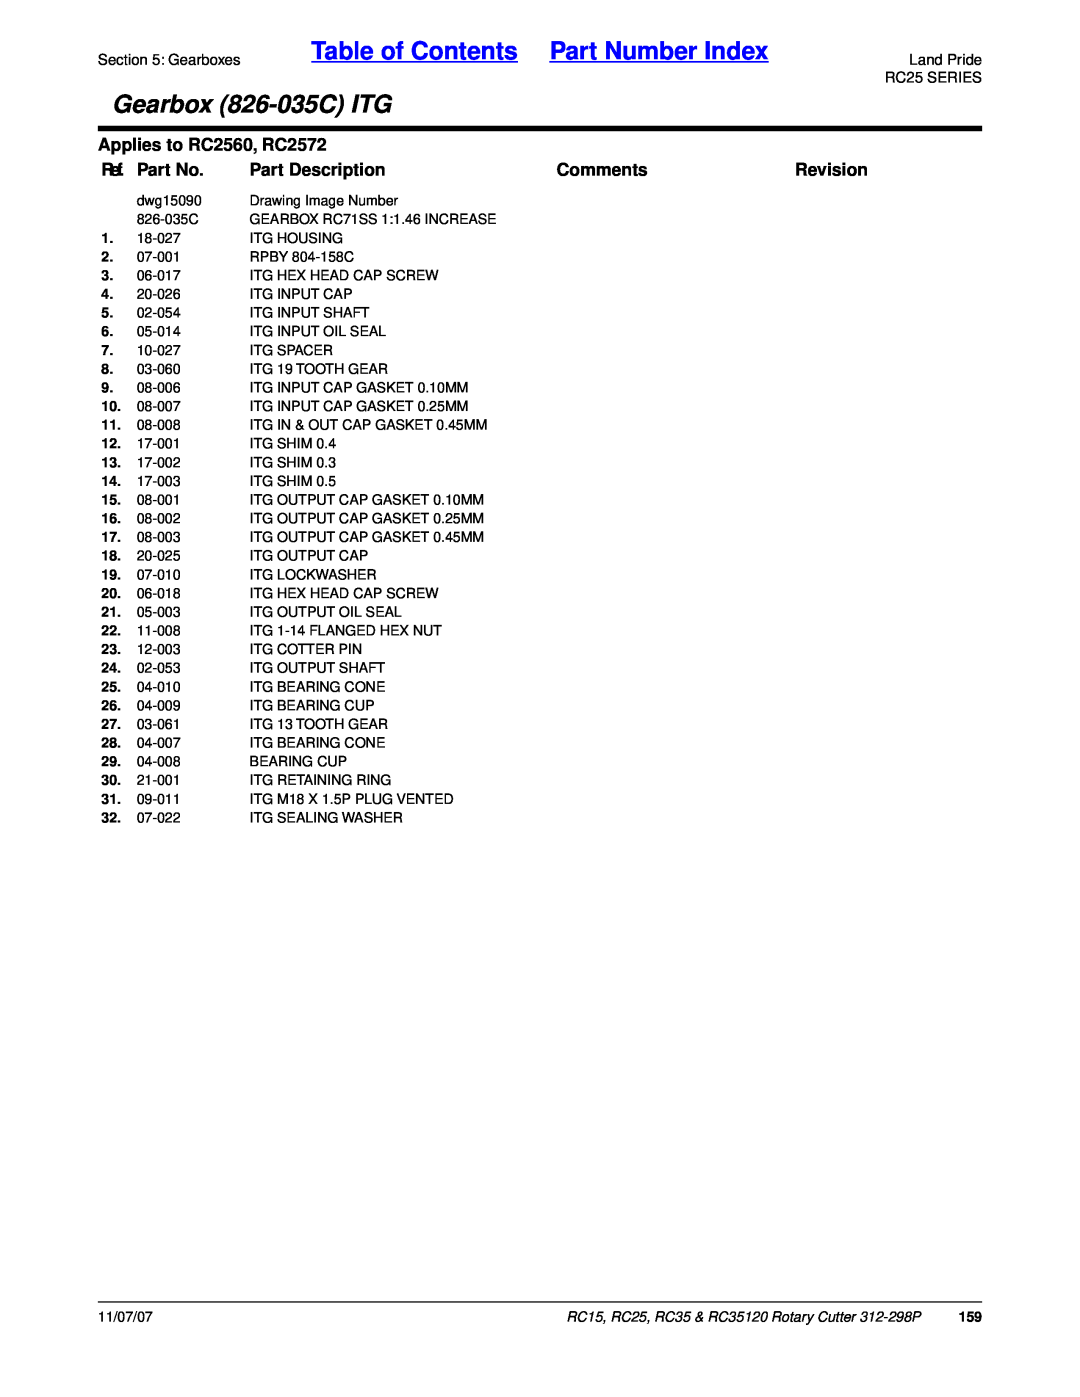 Land Pride RC15, RC35120 Table of Contents Part Number Index, Gearbox 826-035CITG, Applies to RC2560, RC2572, Ref. Part No 